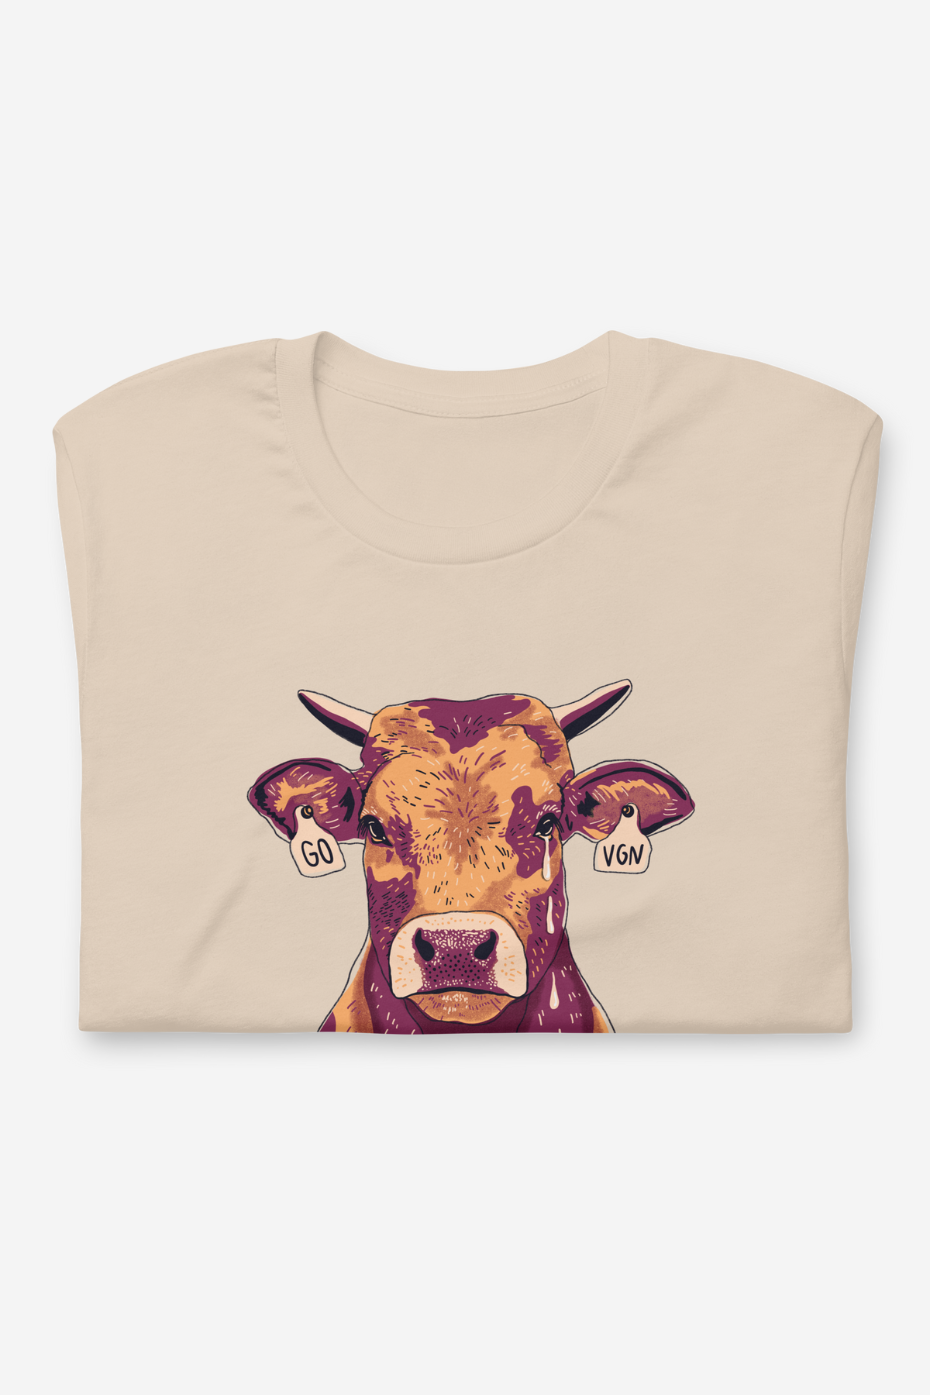 The Real Price of Dairy Unisex t-shirt